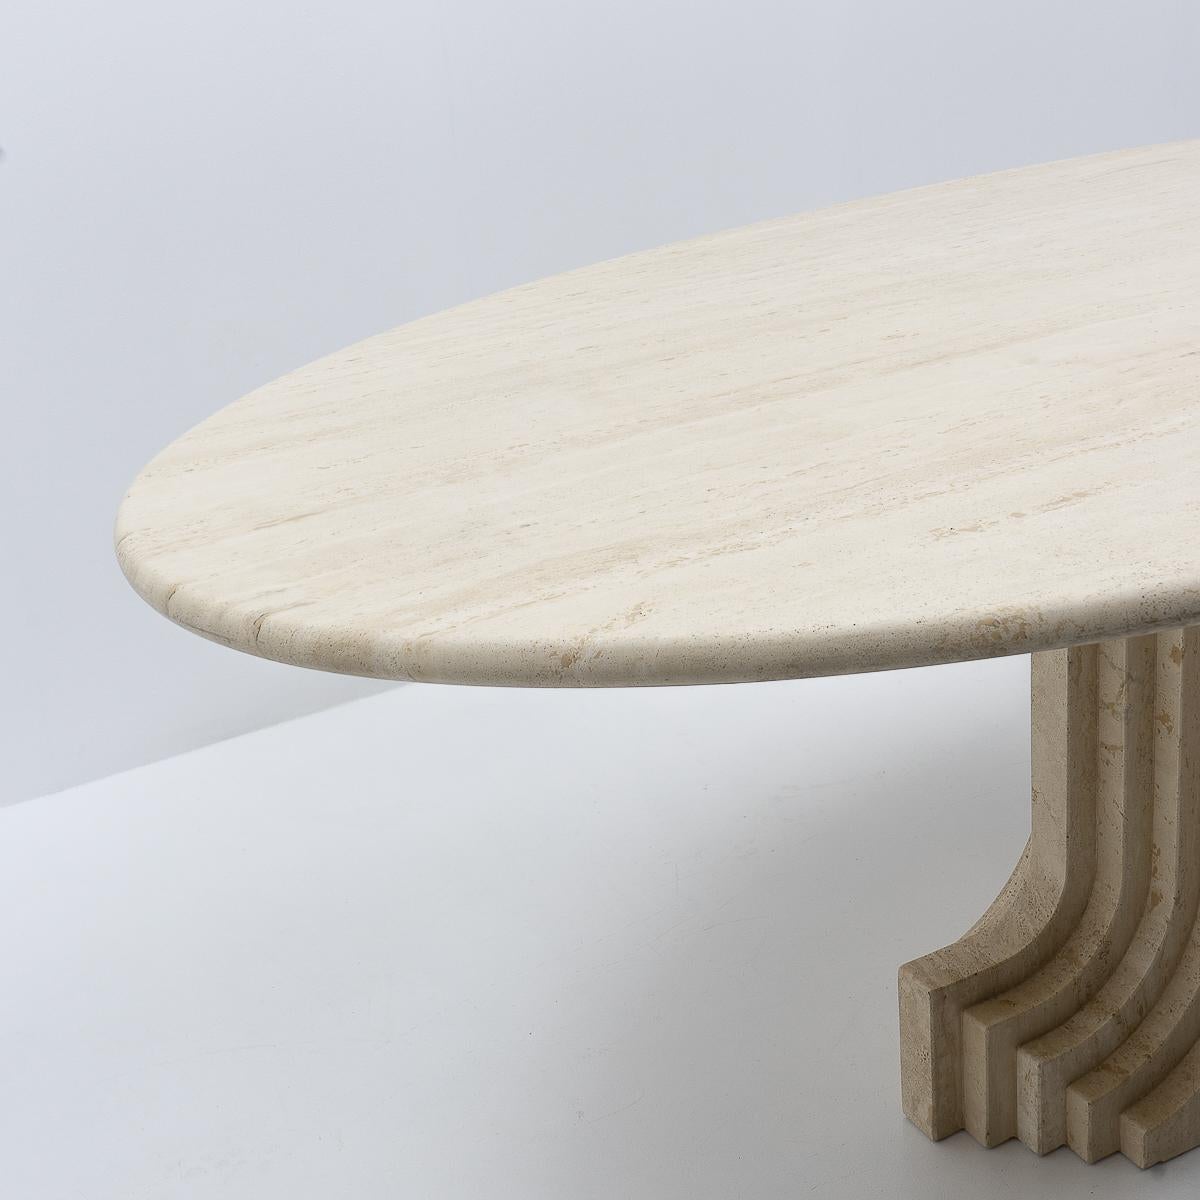 Late 20th Century Sculptural Carlo Scarpa Travertine Dining Table, by Cattelan Italia, 1970s For Sale